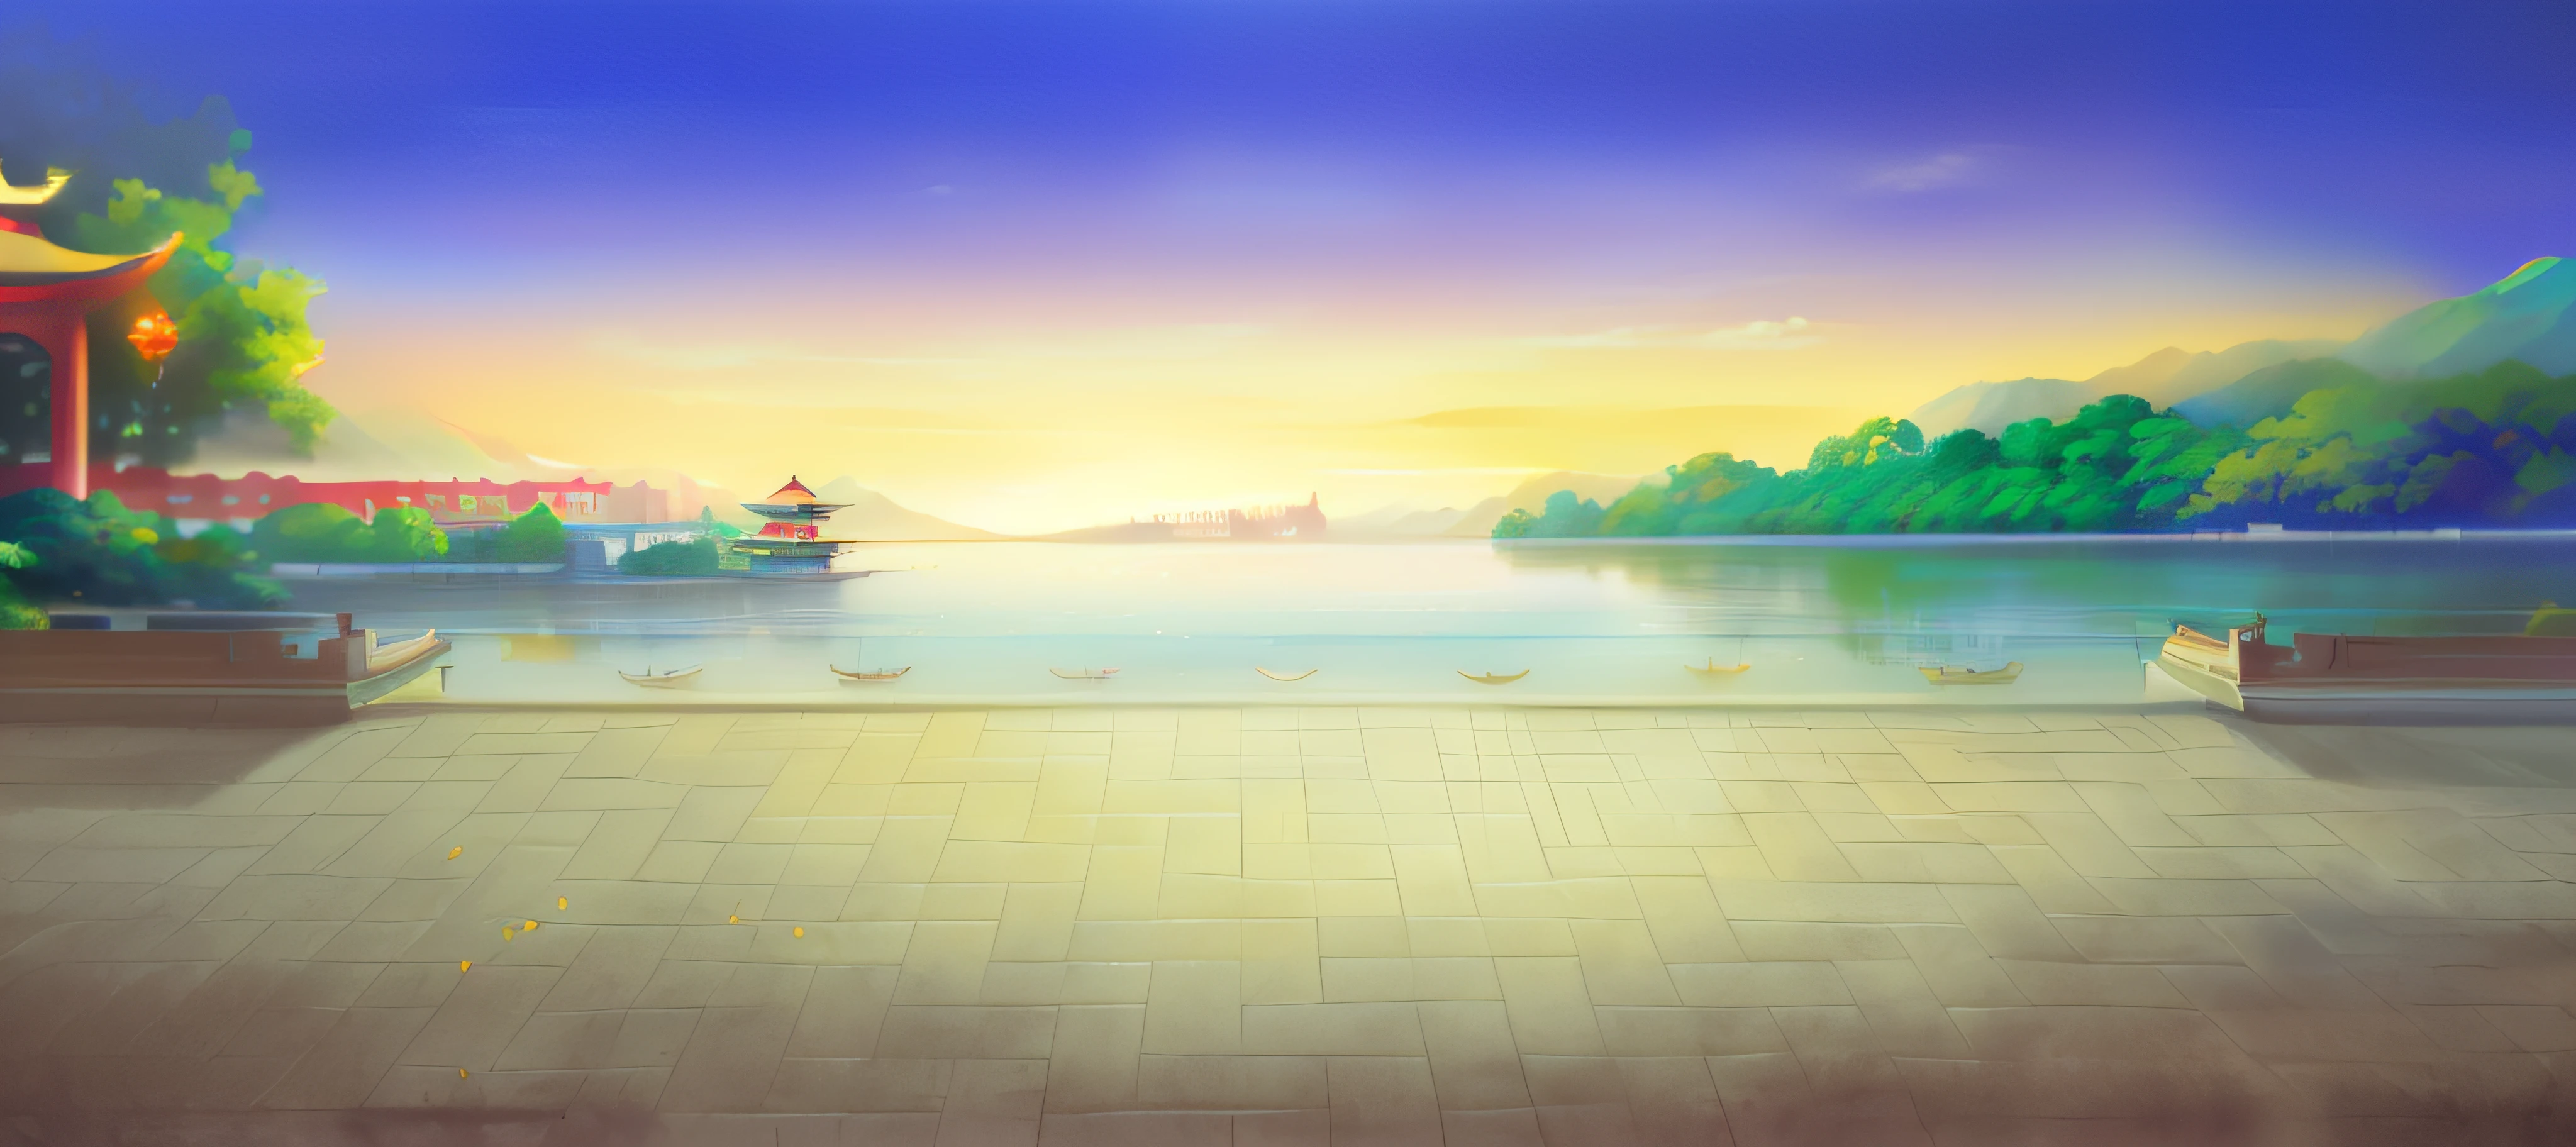 painting of a beautiful landscape with a lake and a pagoda, palace background, Lake background, Anime background art, beautiful lake background, background artwork, a temple background, port scene background, royal garden background, arte de fundo, light kingdom backdrop, anime backgrounds, Dawn background, golden hour background, Detailed scenery —width 672, renaissance port city background, ballroom background